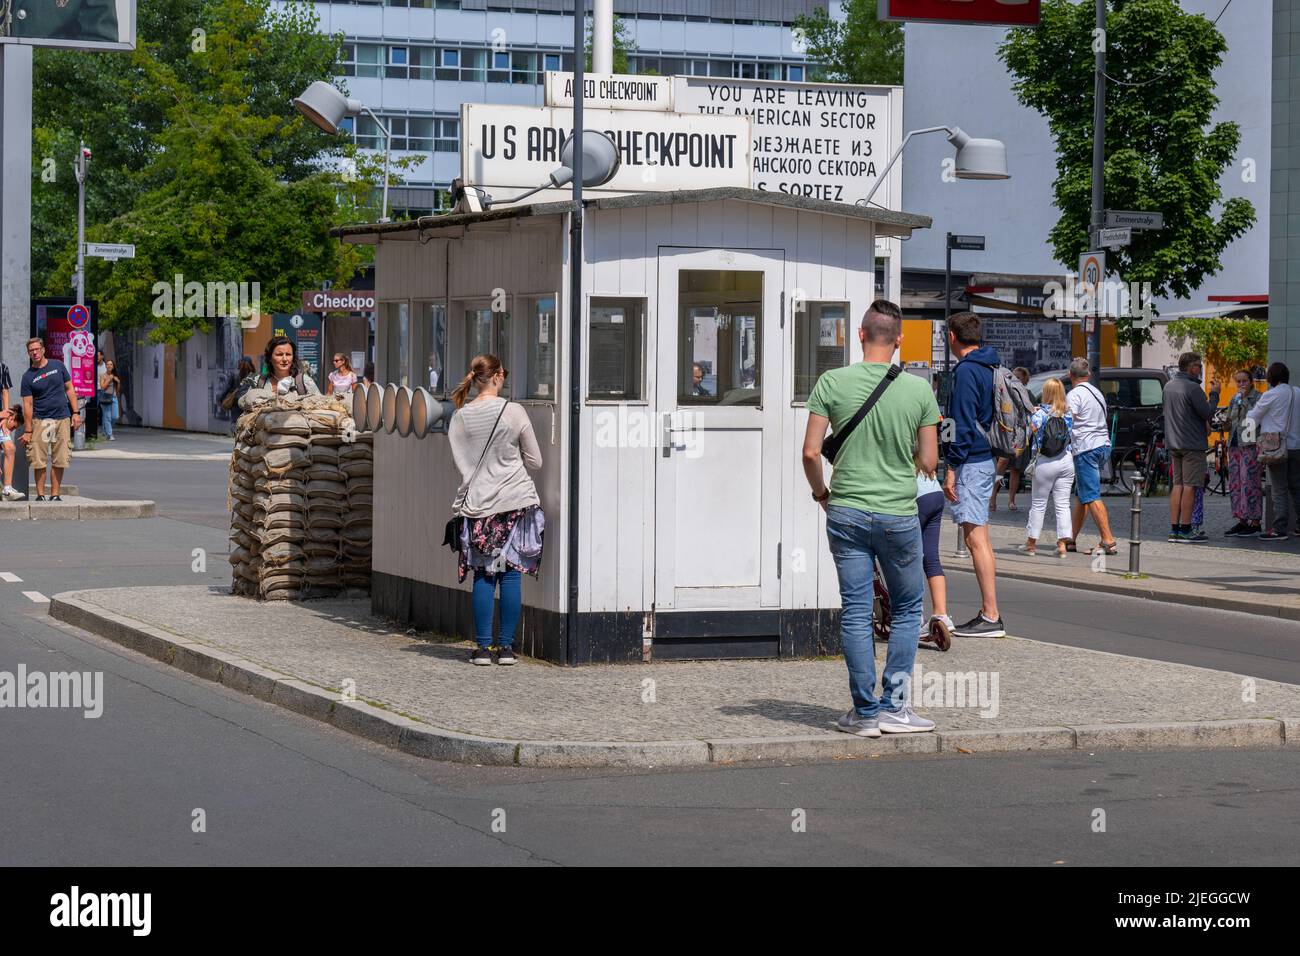 Berlin, Germany - August 4, 2021: People at the Checkpoint Charlie, old Berlin Wall crossing point between East and West Berlin, city landmar Stock Photo